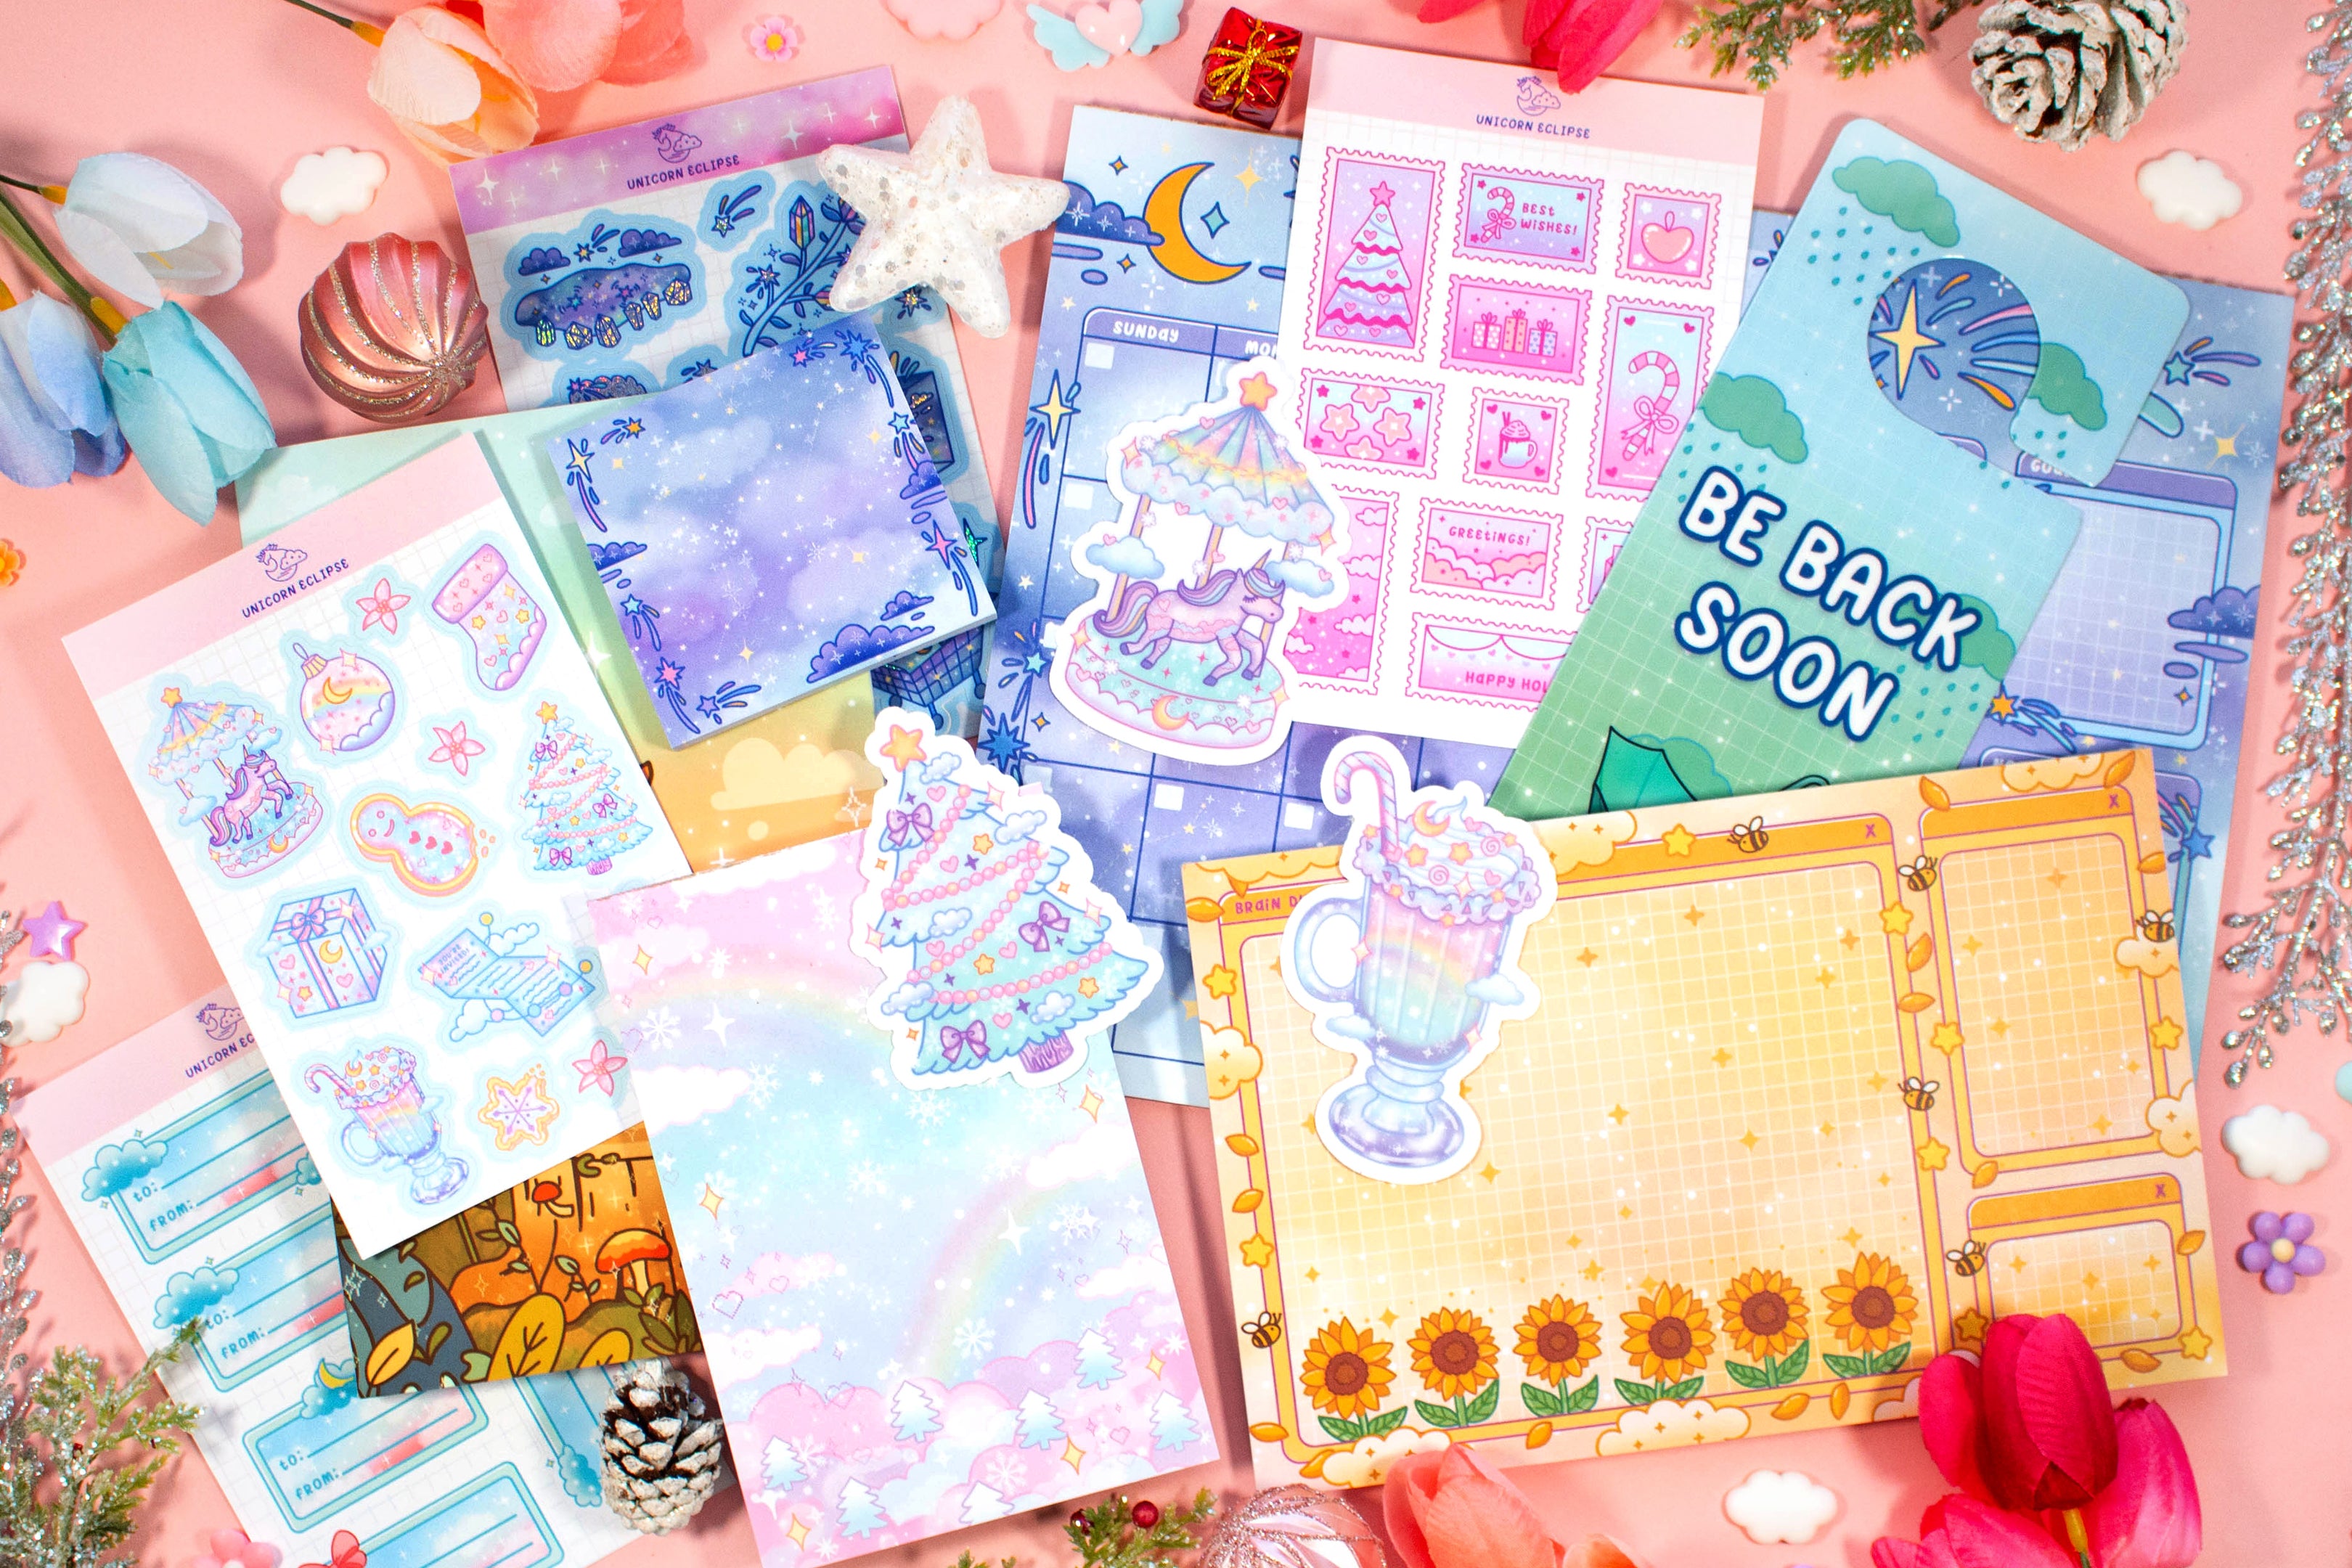 PART 2] 🌷Cute Sanrio Decals/Decal Id ✨ For your Royale High Journal 